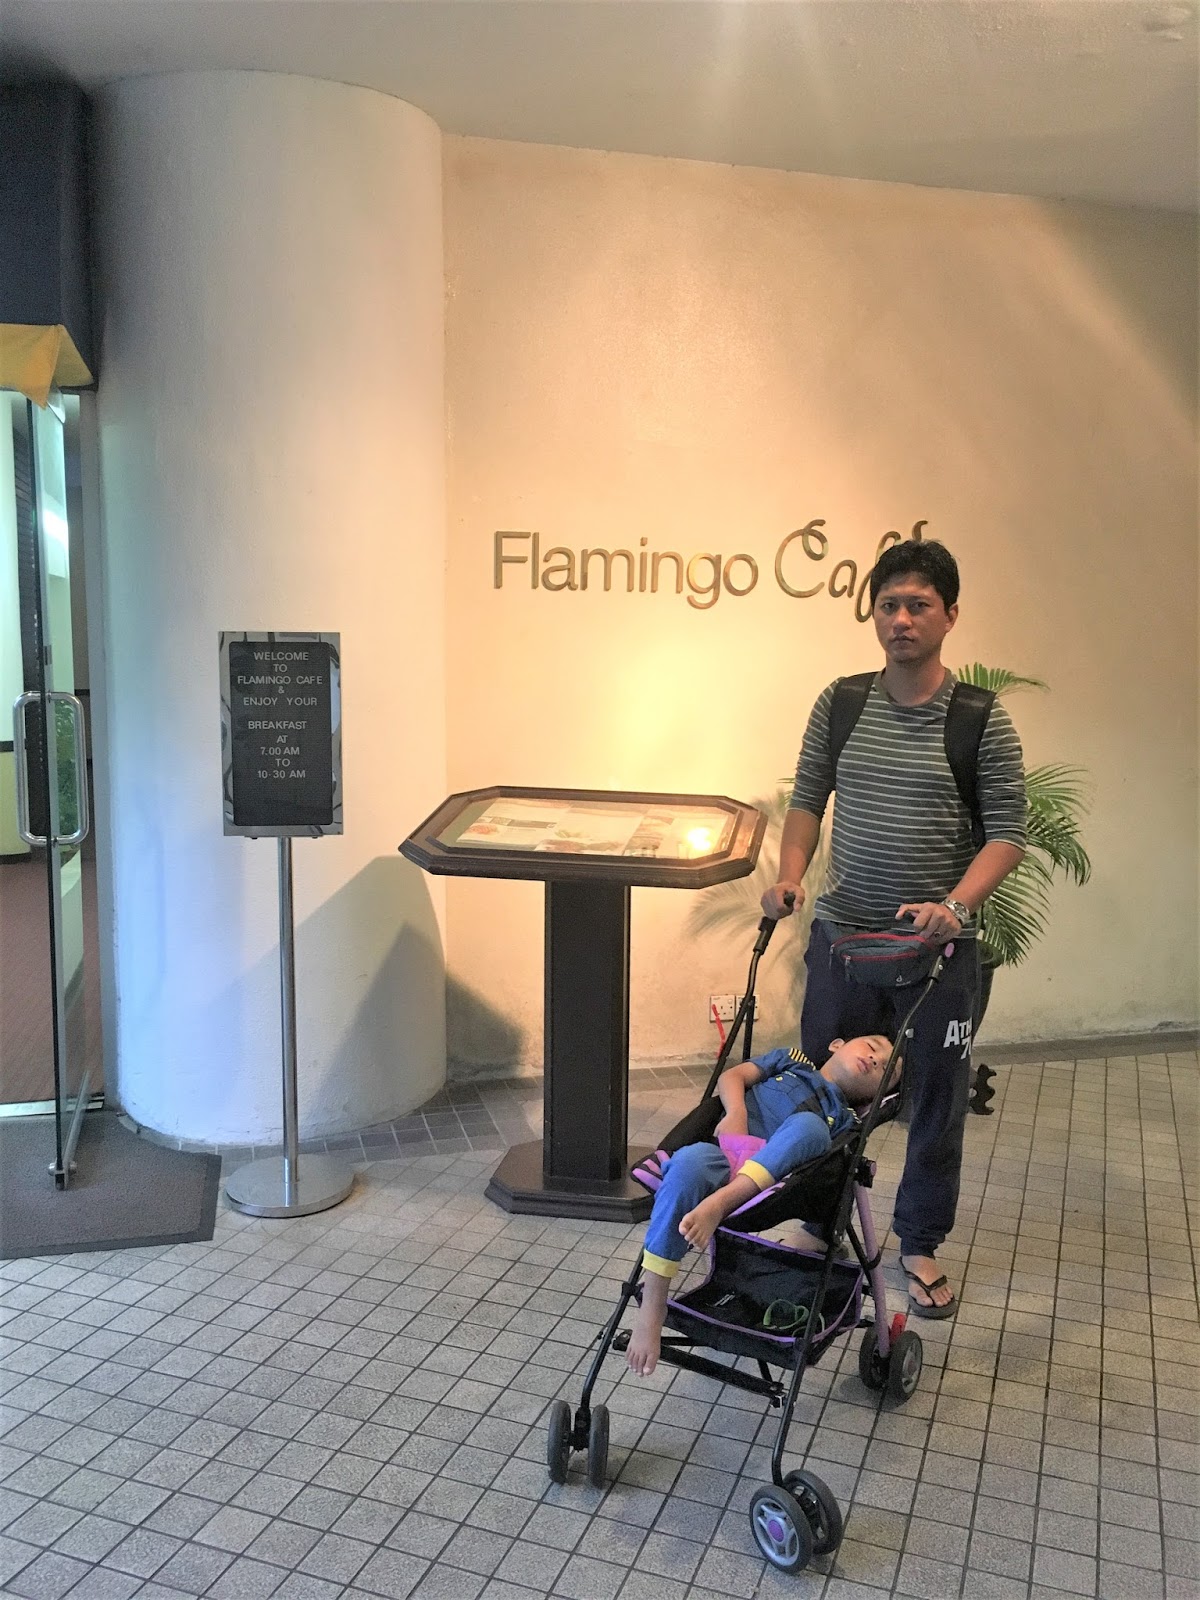 Flamingo Hotel By The Beach, Penang │ An Irresistible Experience Vacation Part 2